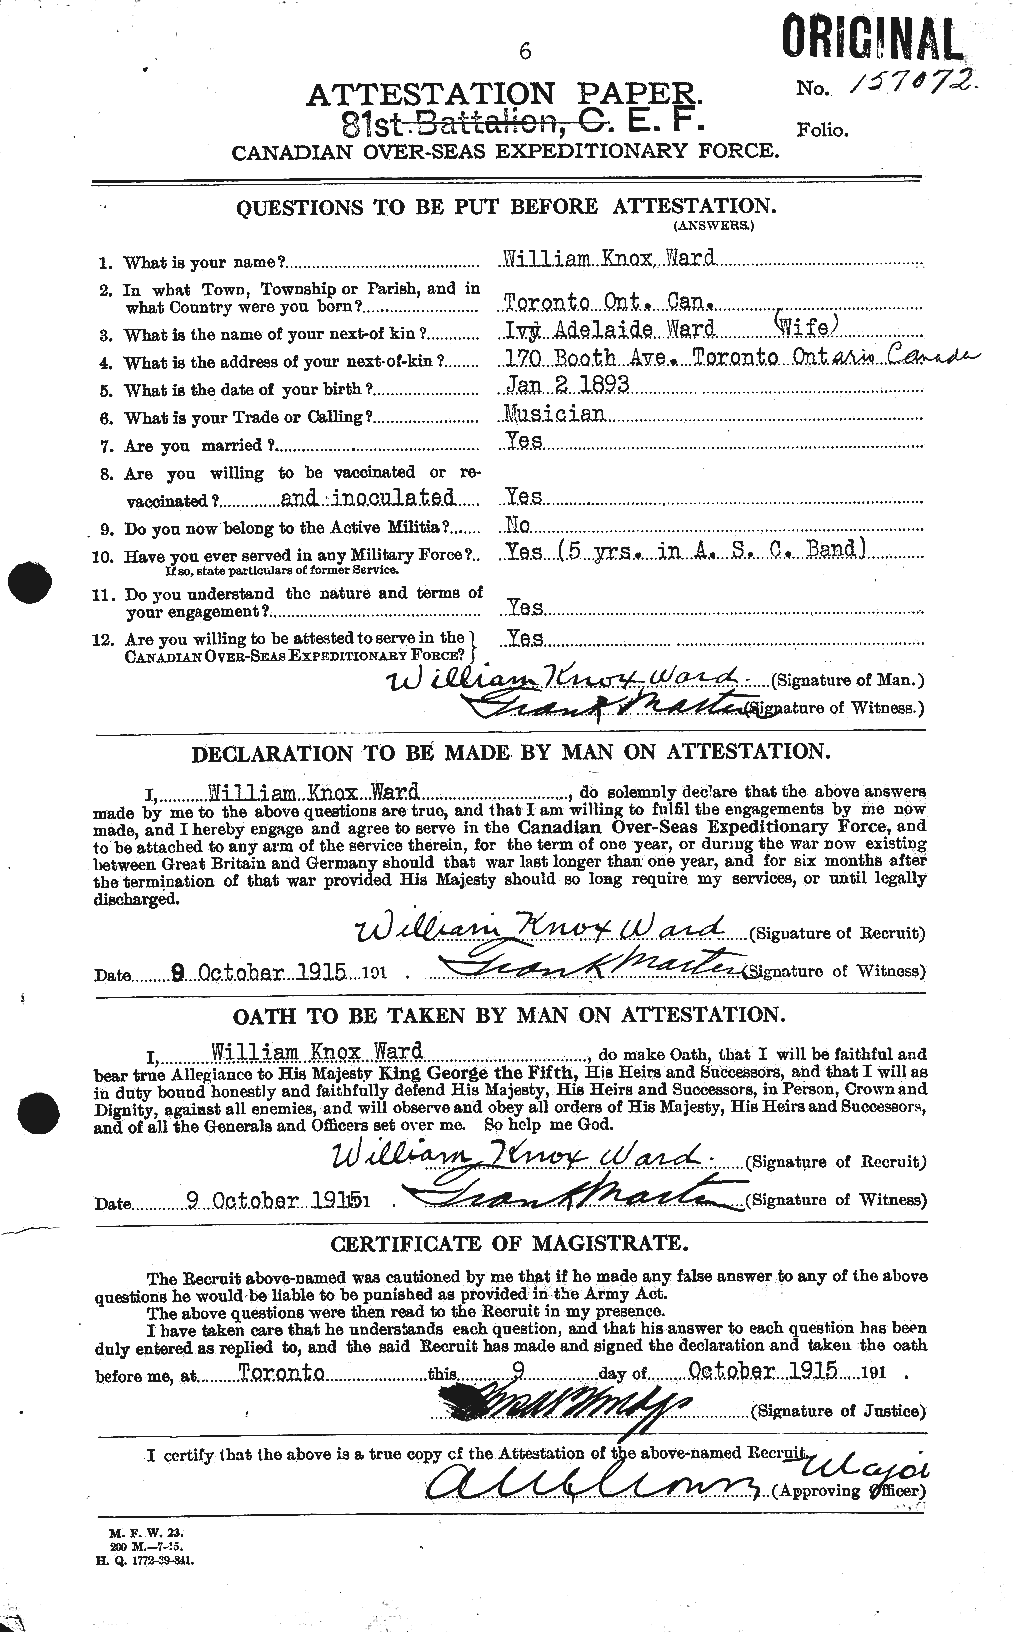 Personnel Records of the First World War - CEF 659834a